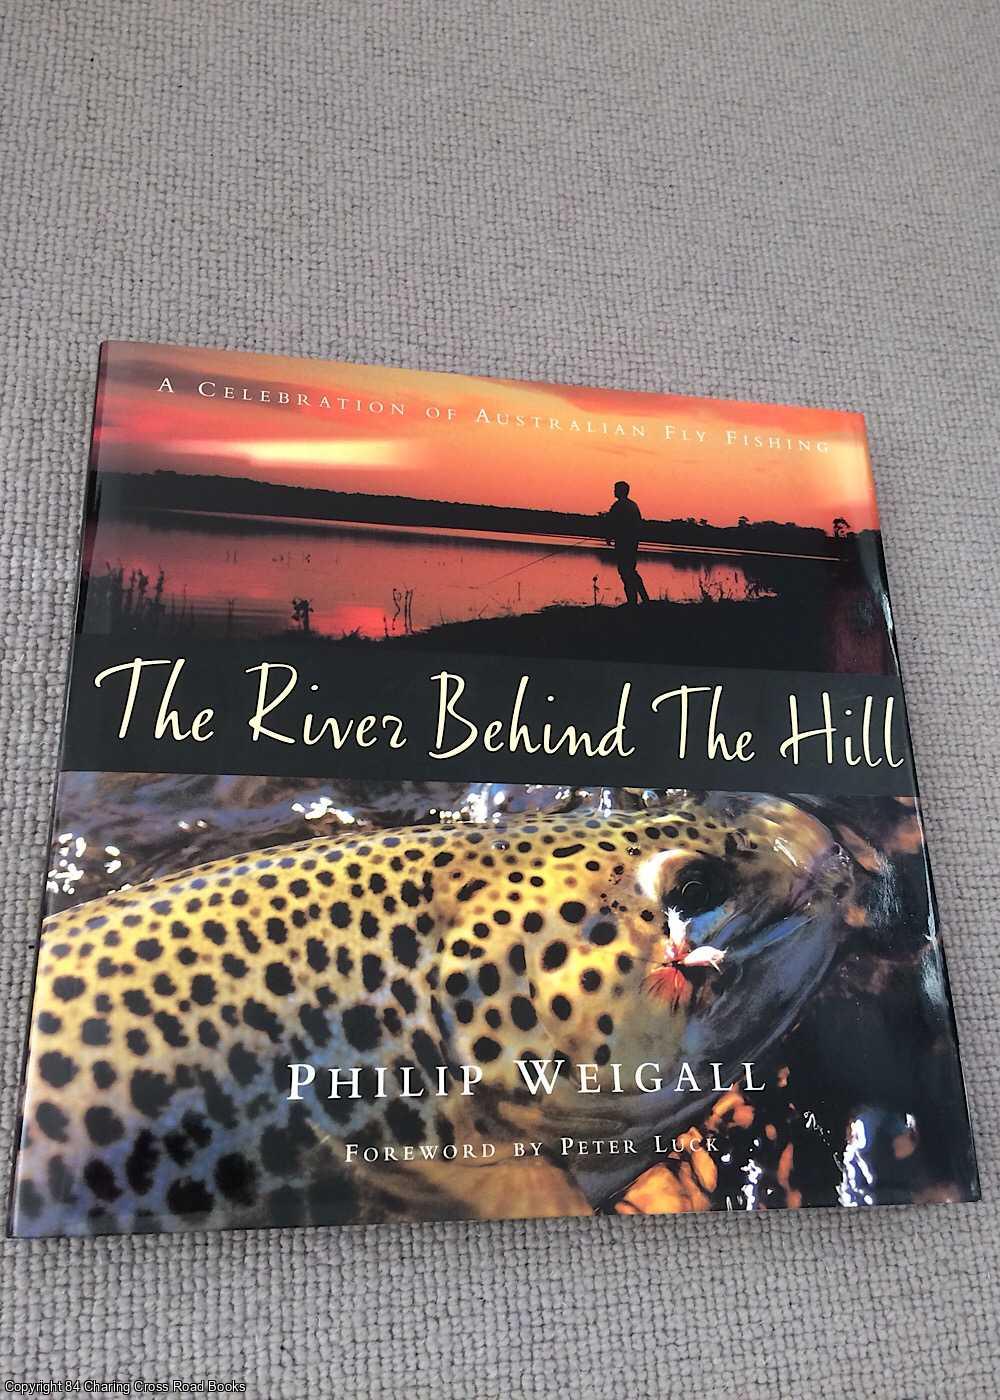 Weigall, Philip - The River Behind the Hill: A Celebration of Australian Fly Fishing